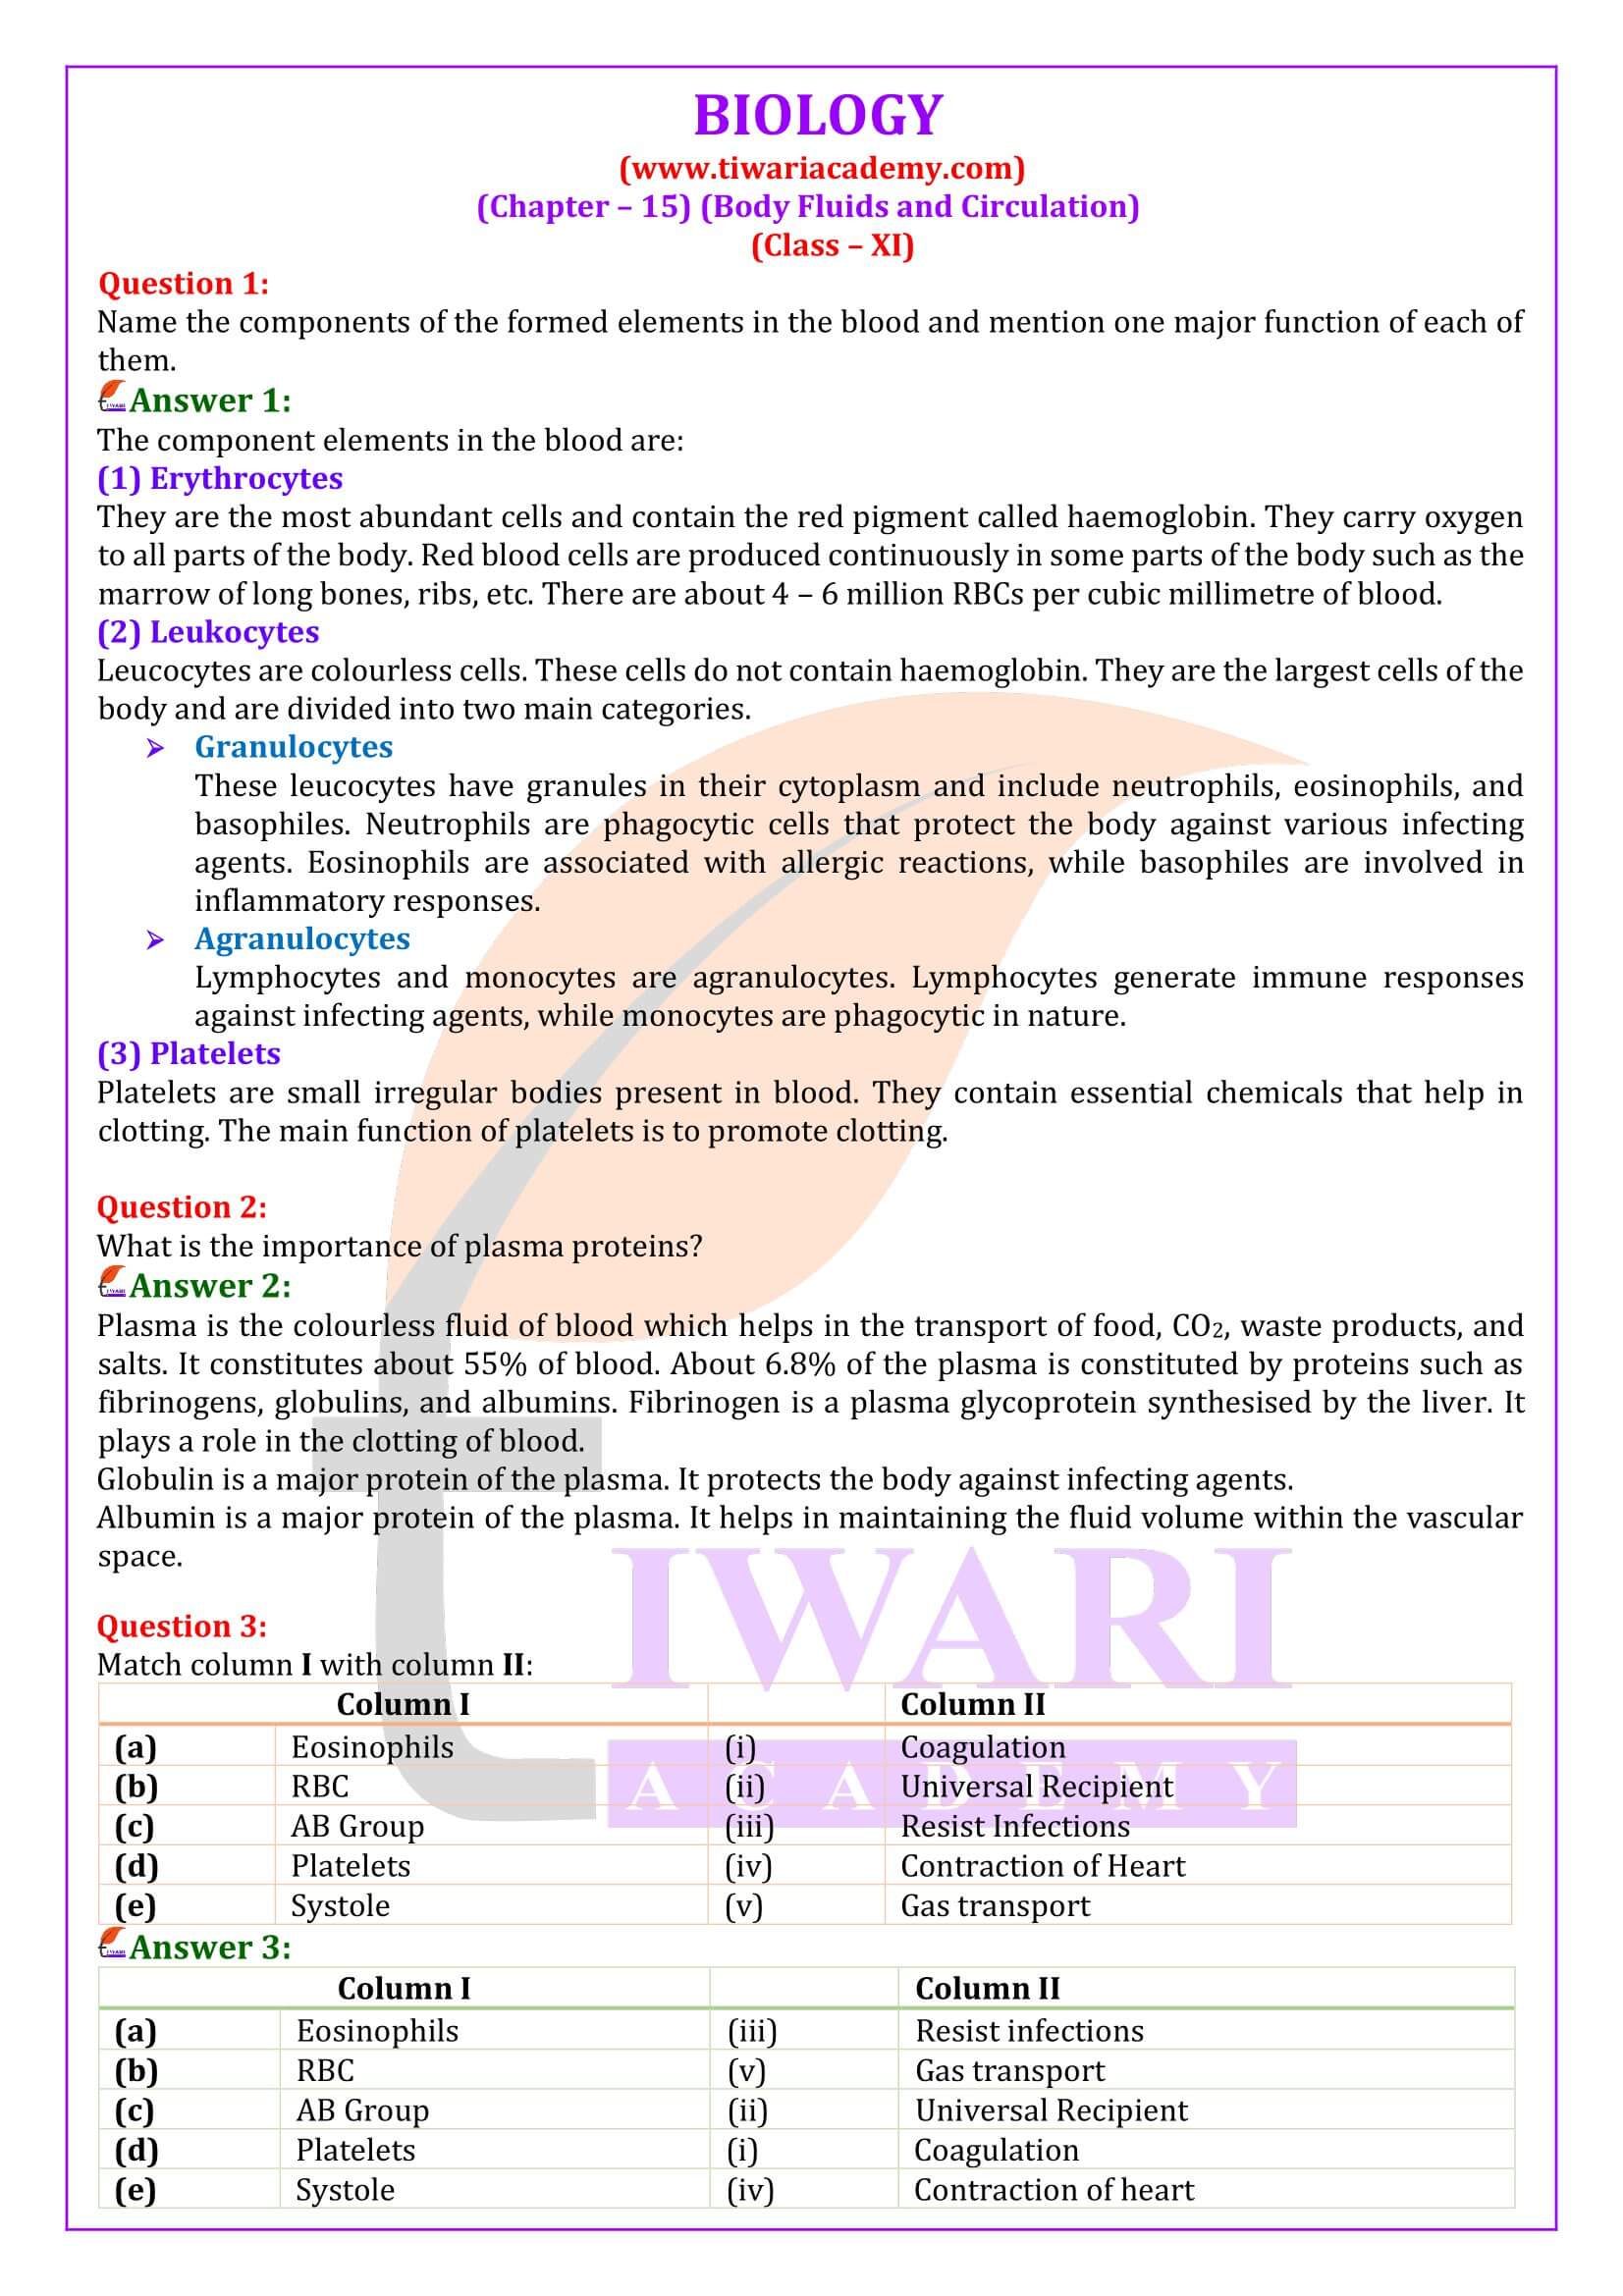 NCERT Solutions for Class 11 Biology Chapter 15